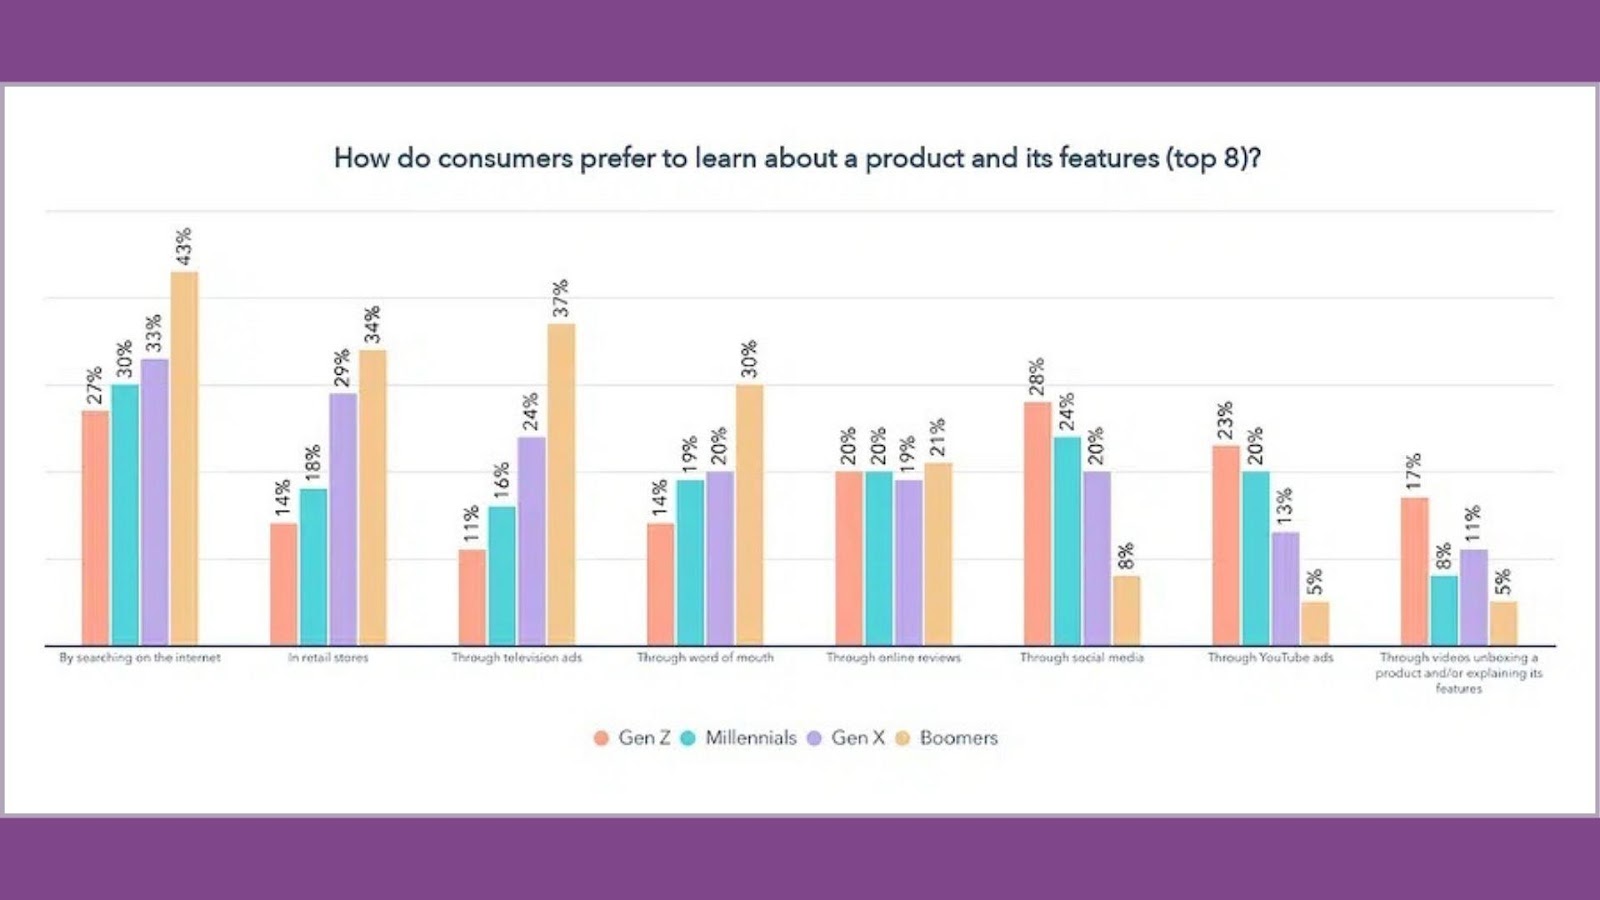 According to Hubspot’s survey on 1000 consumers, “Gen Z, Millennials, and Gen X set themselves apart from Boomers through their preference for learning about products through social media and YouTube ads. Gen Z also favors unboxing videos more than any other generation.”